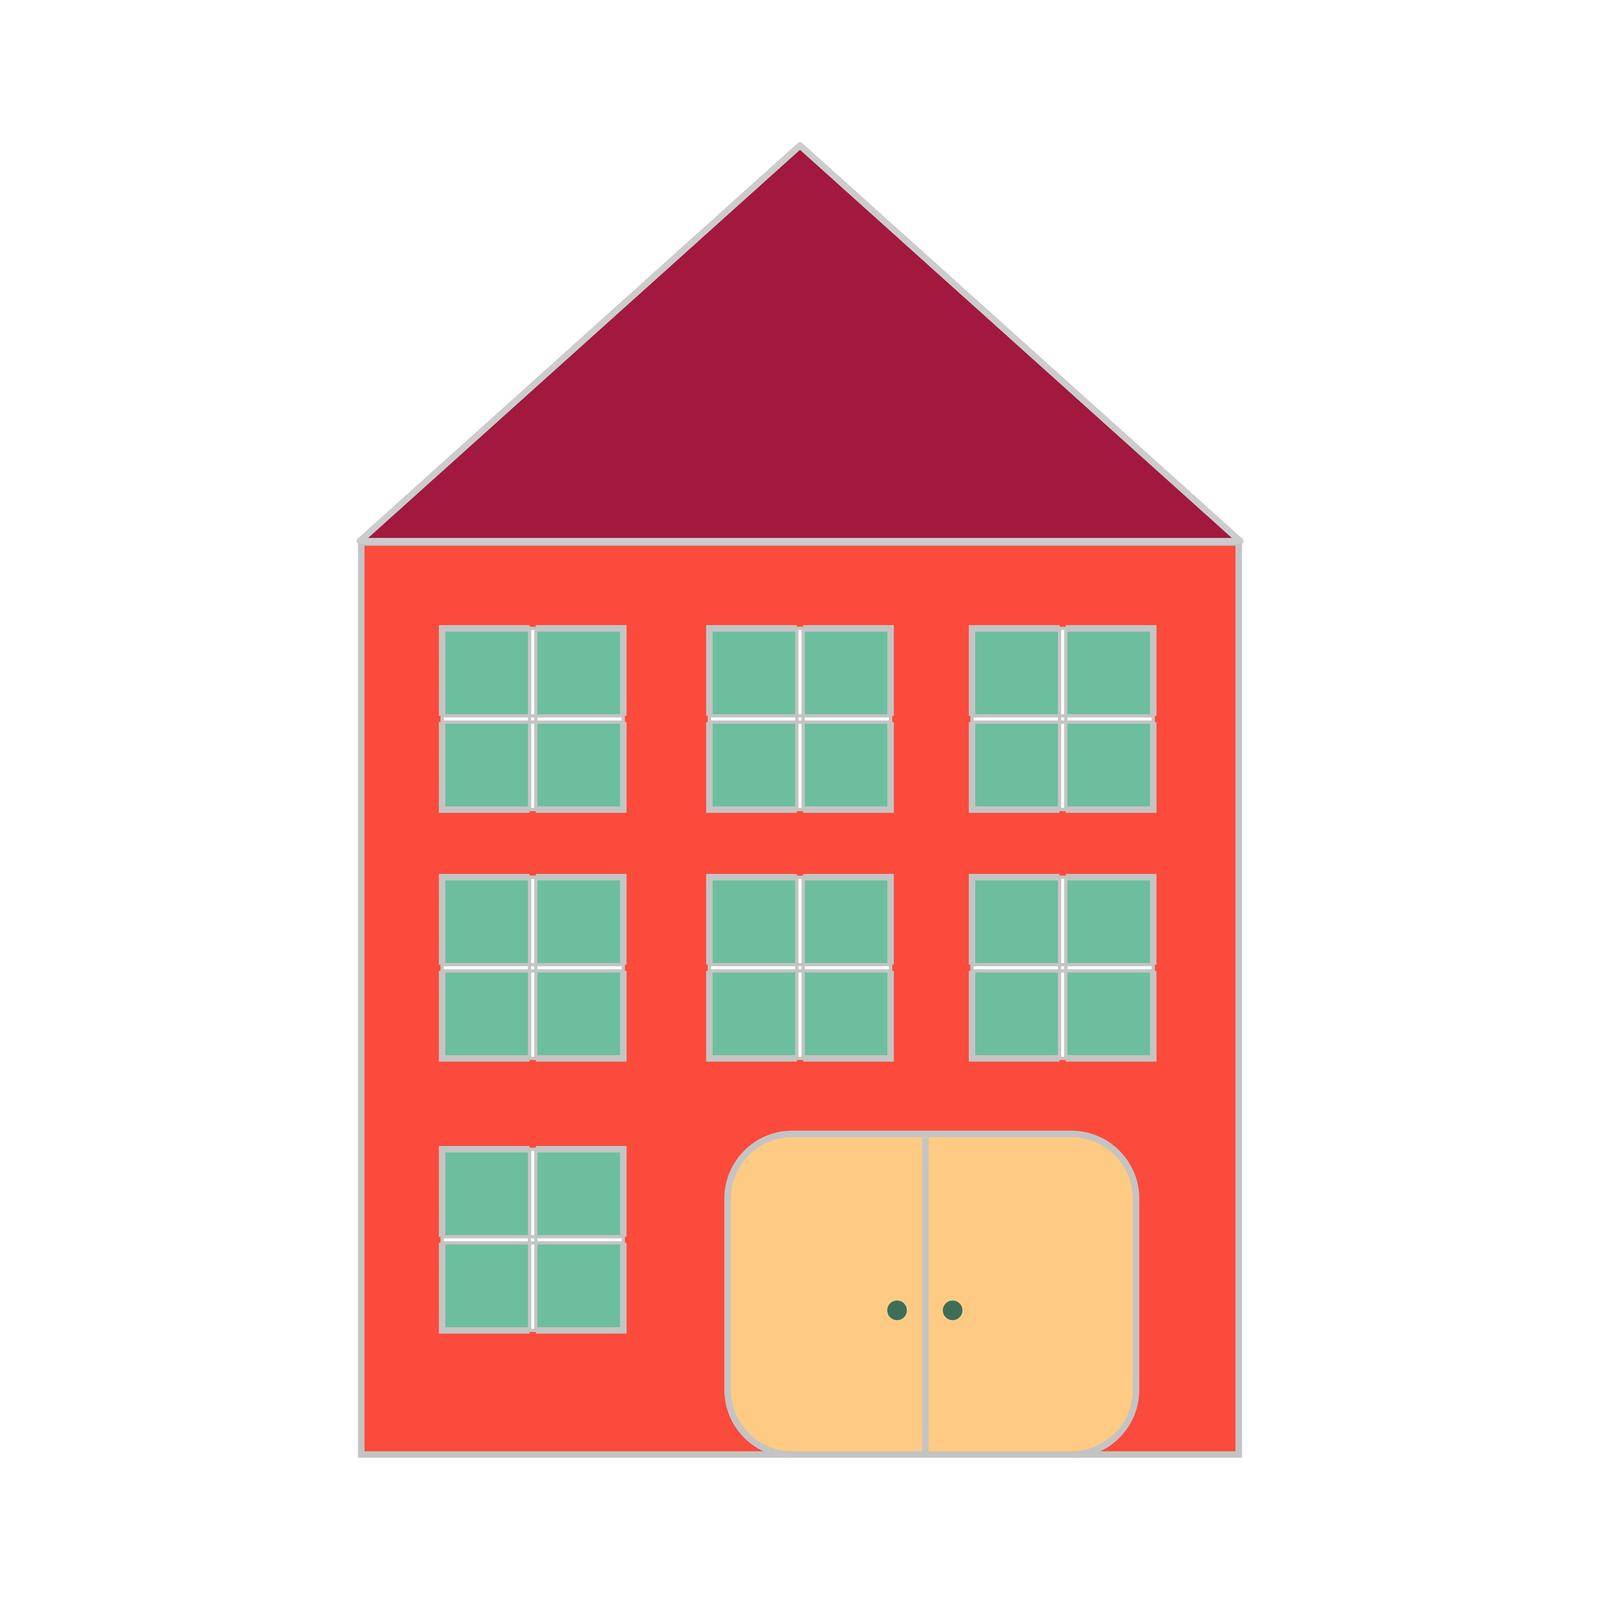 House in flat style for web, cards, infographics